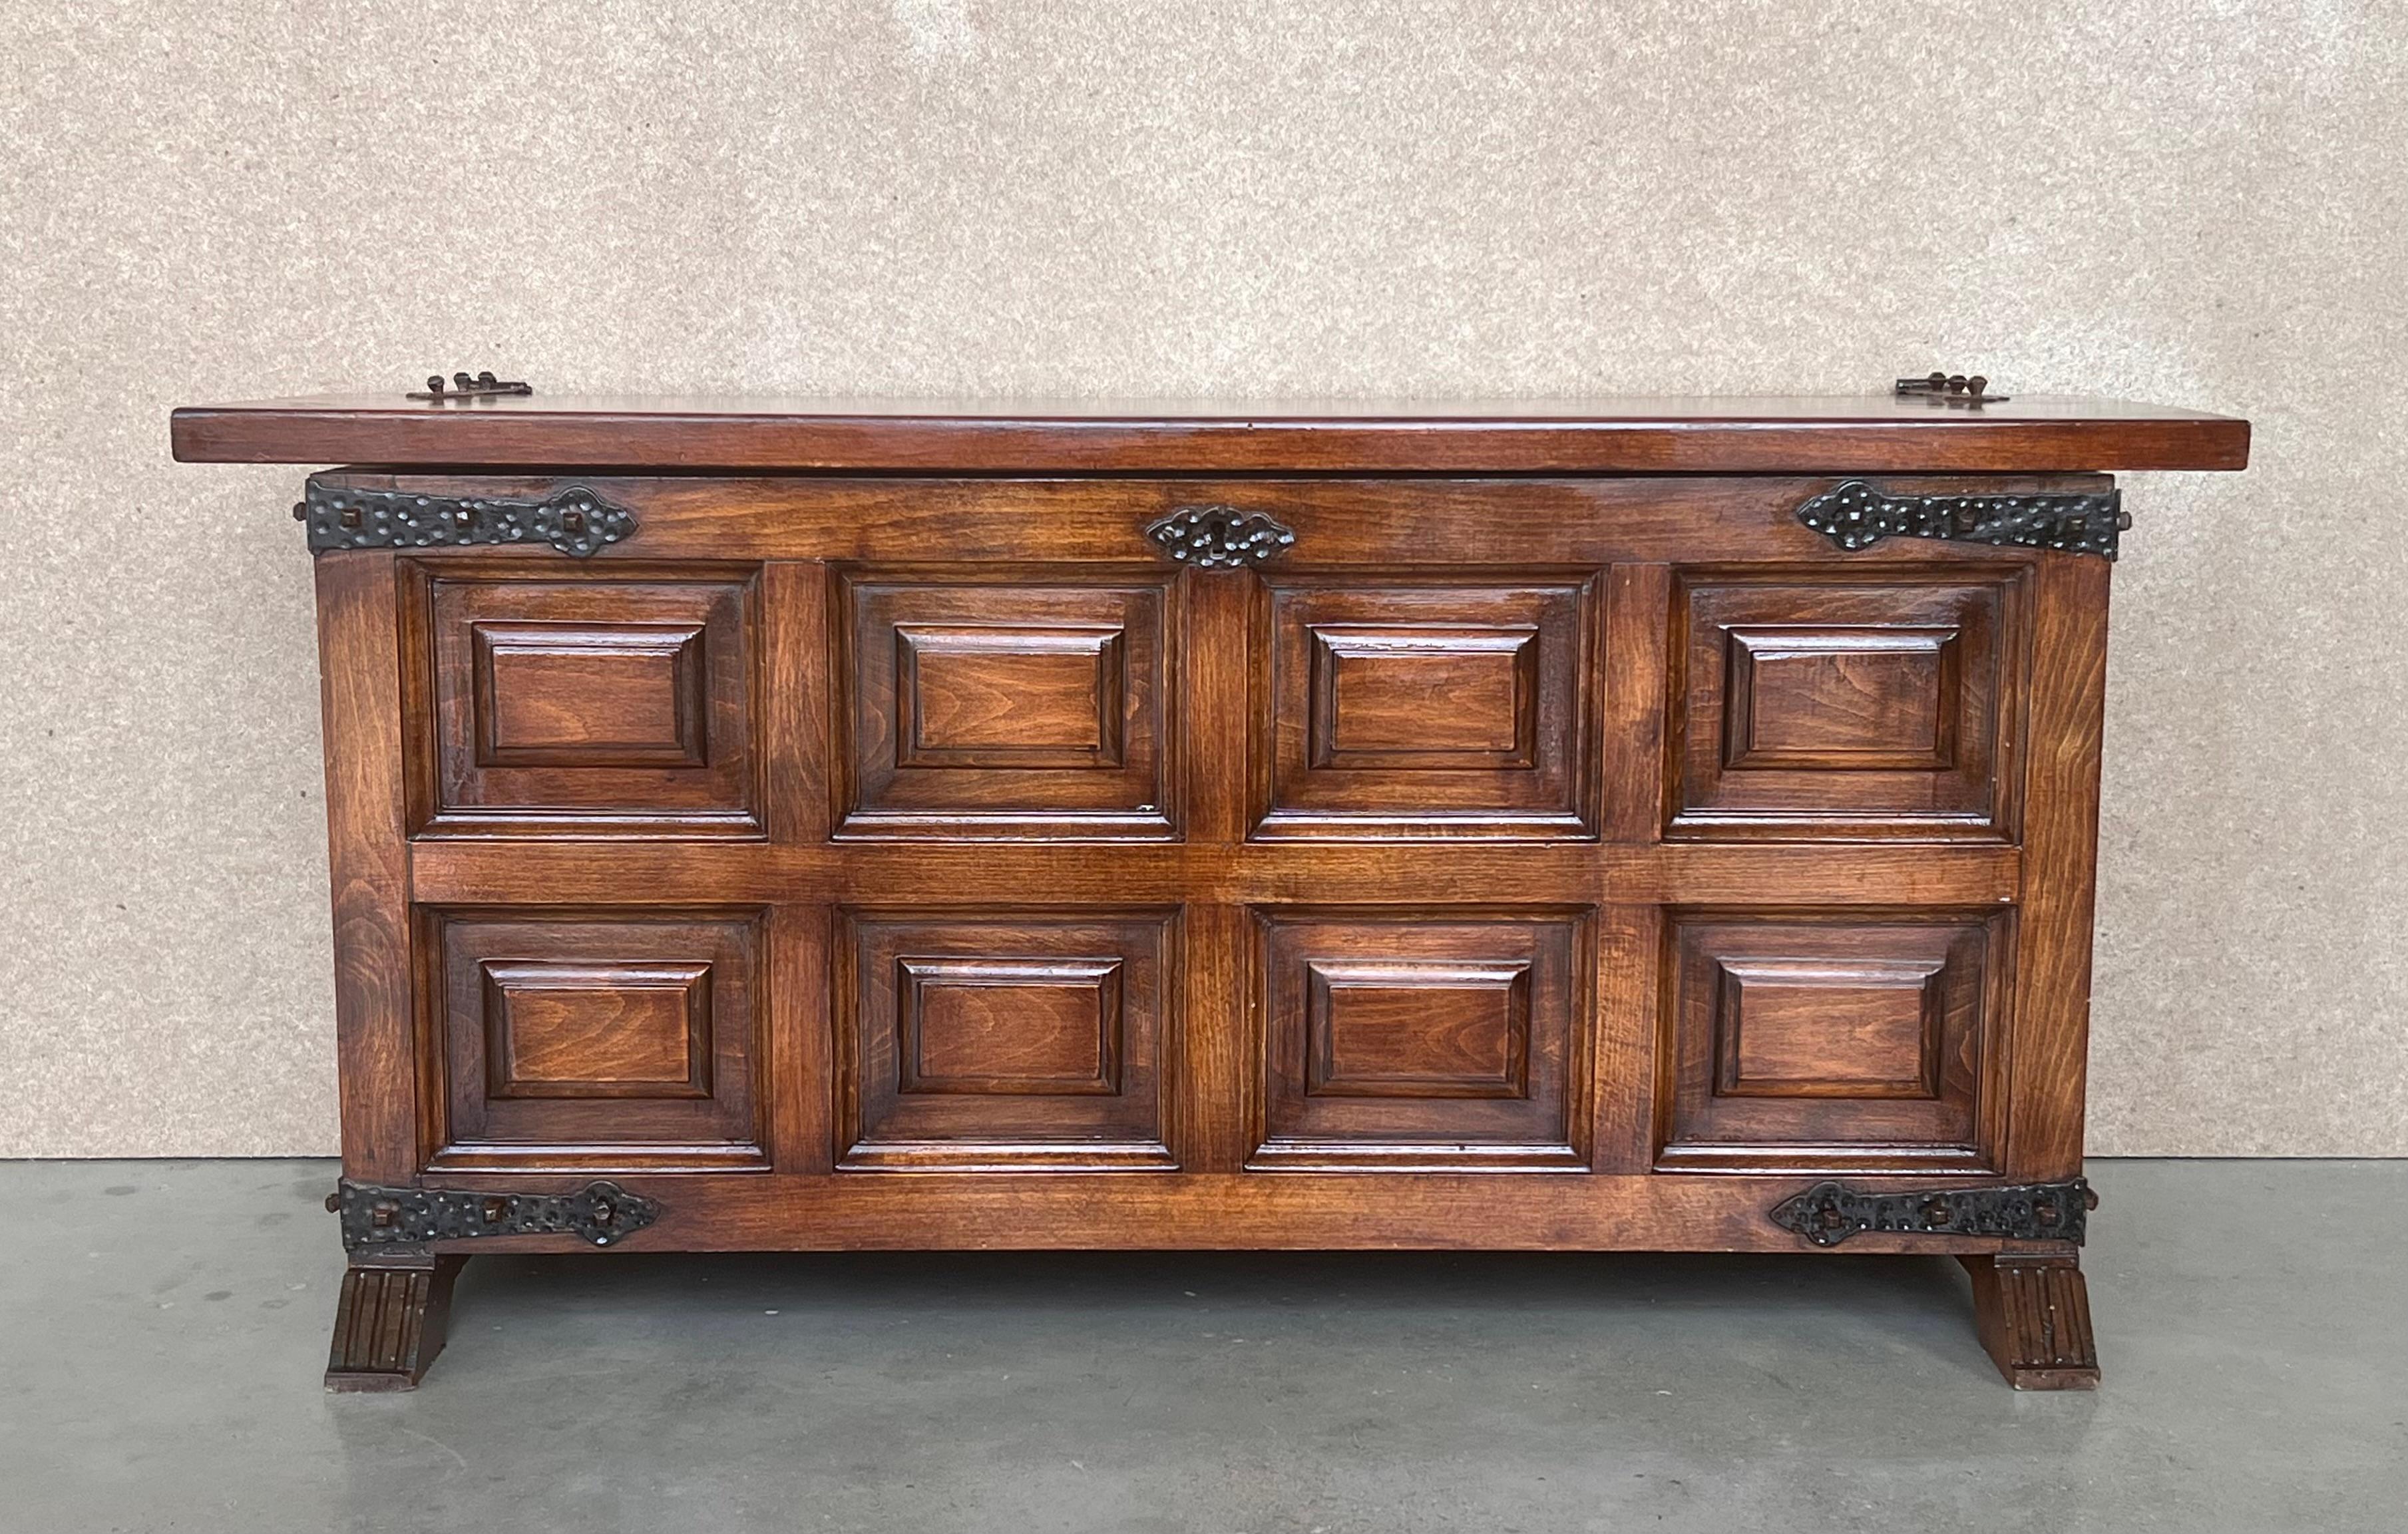 20th Spanish trunk with raised wooden panels and original iron hardware

A Spanish carved wood blanket chest from the 20th century. This antique trunk from Spain features a wood case heavily carved in geometric patterns. This wooden chest has a